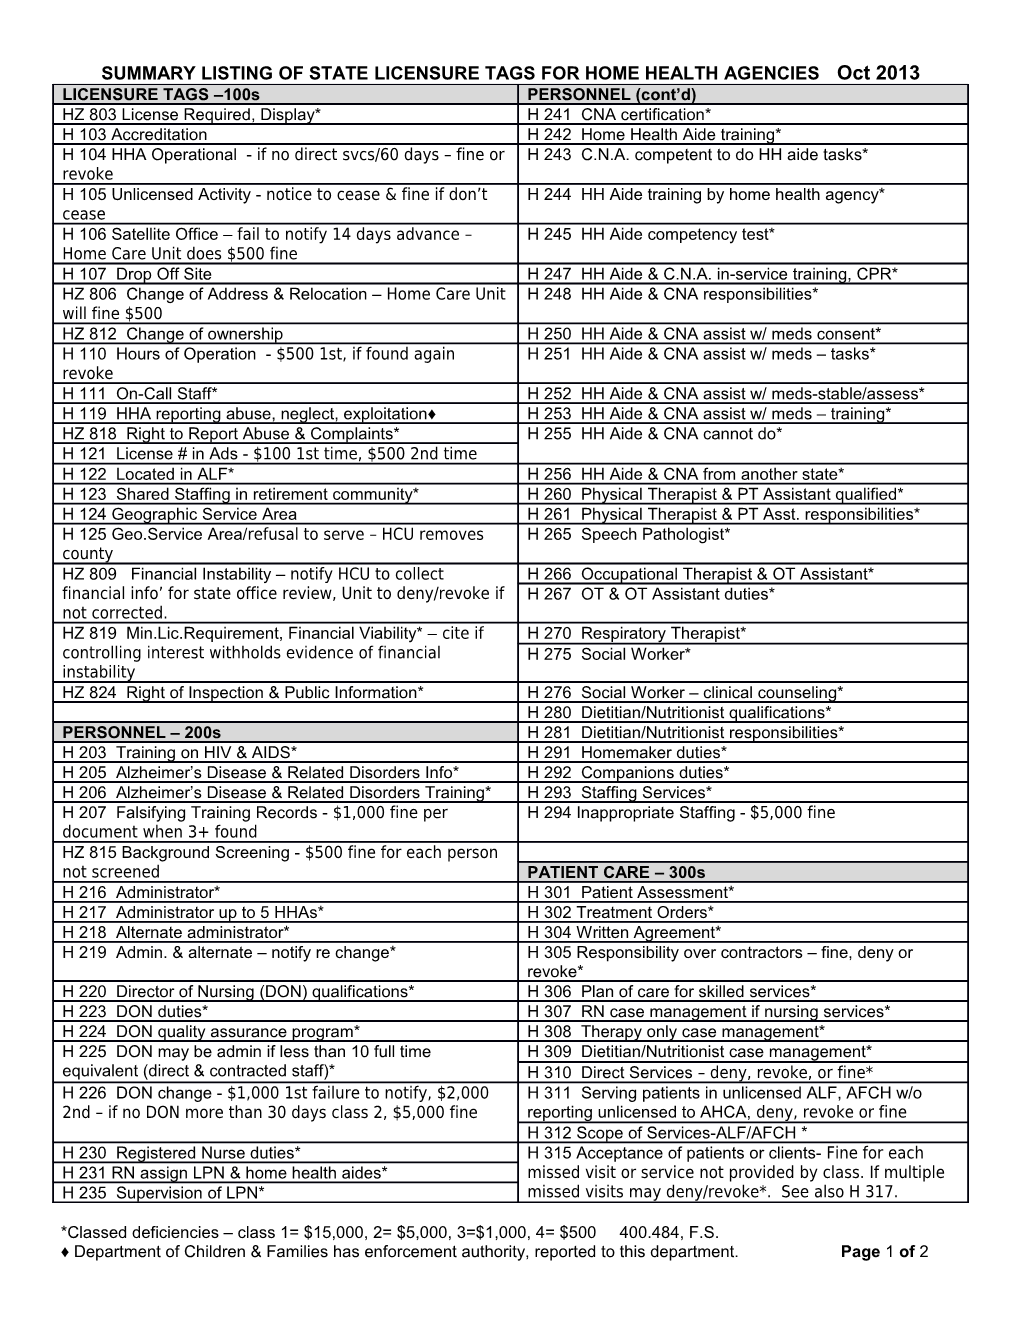 Summary Listing of State Licensure Tags